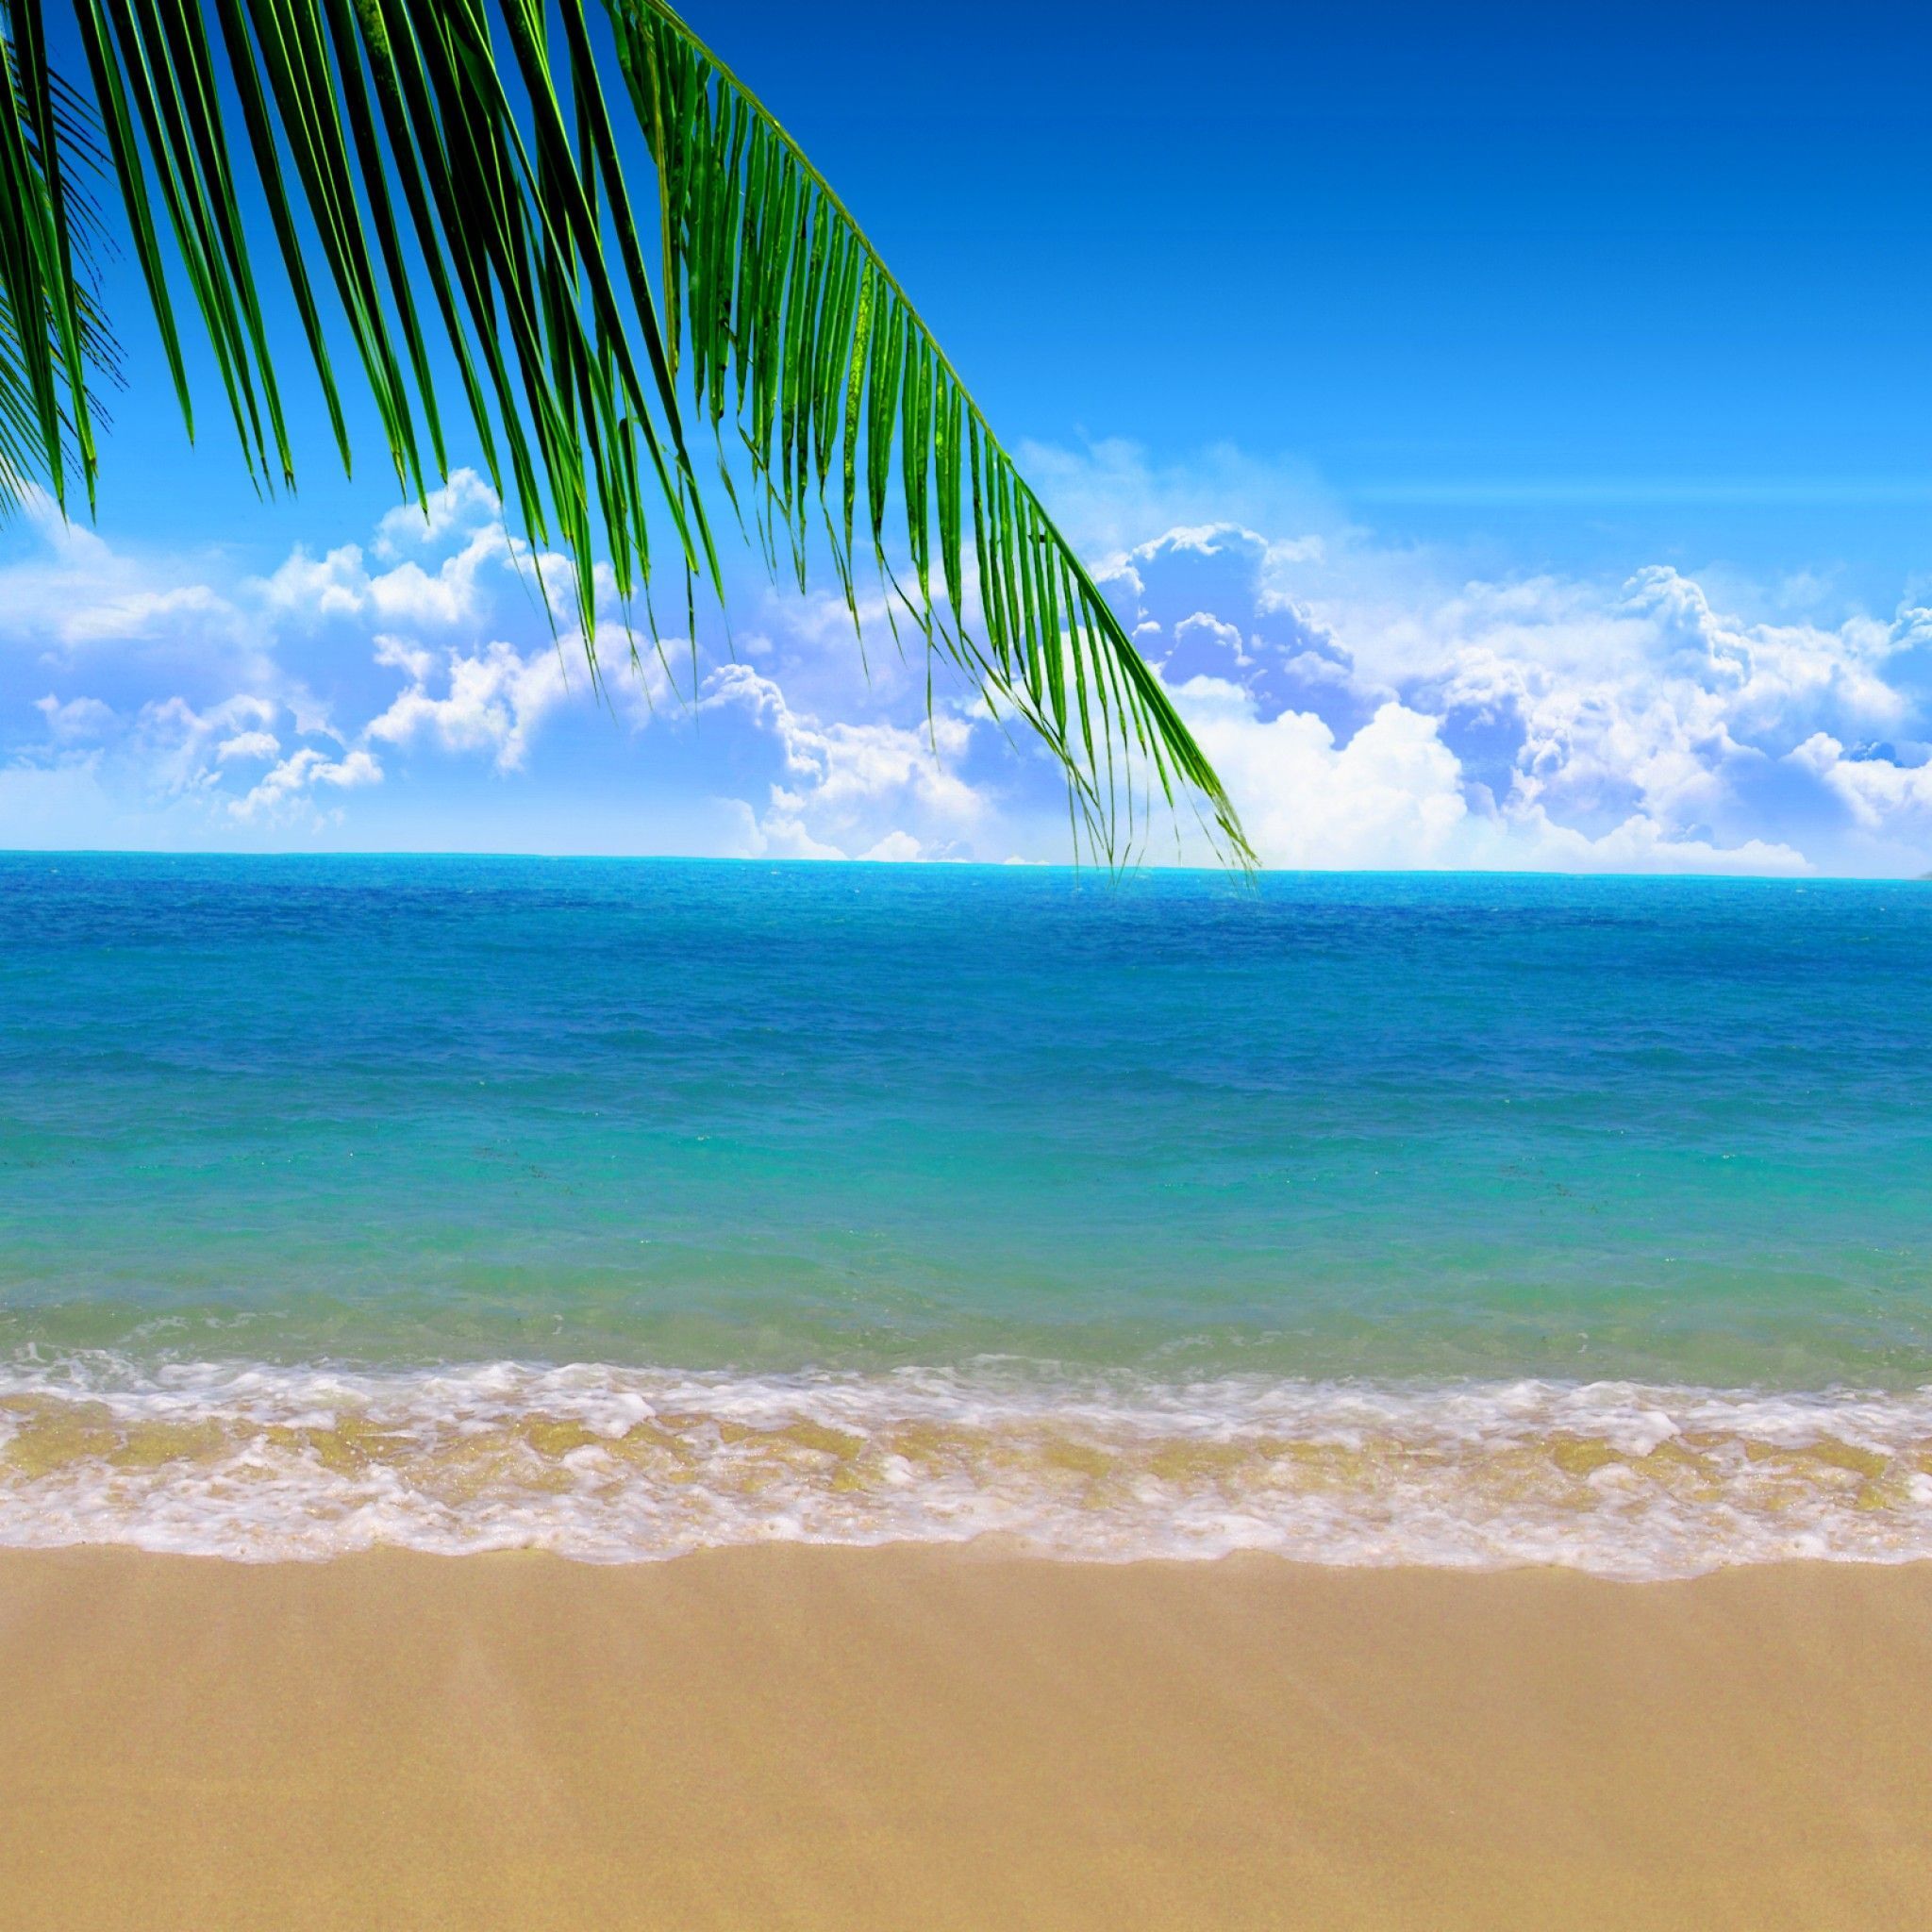 iWallpapers - Summer beach iPad wallpapers and backgrounds | iPad ...